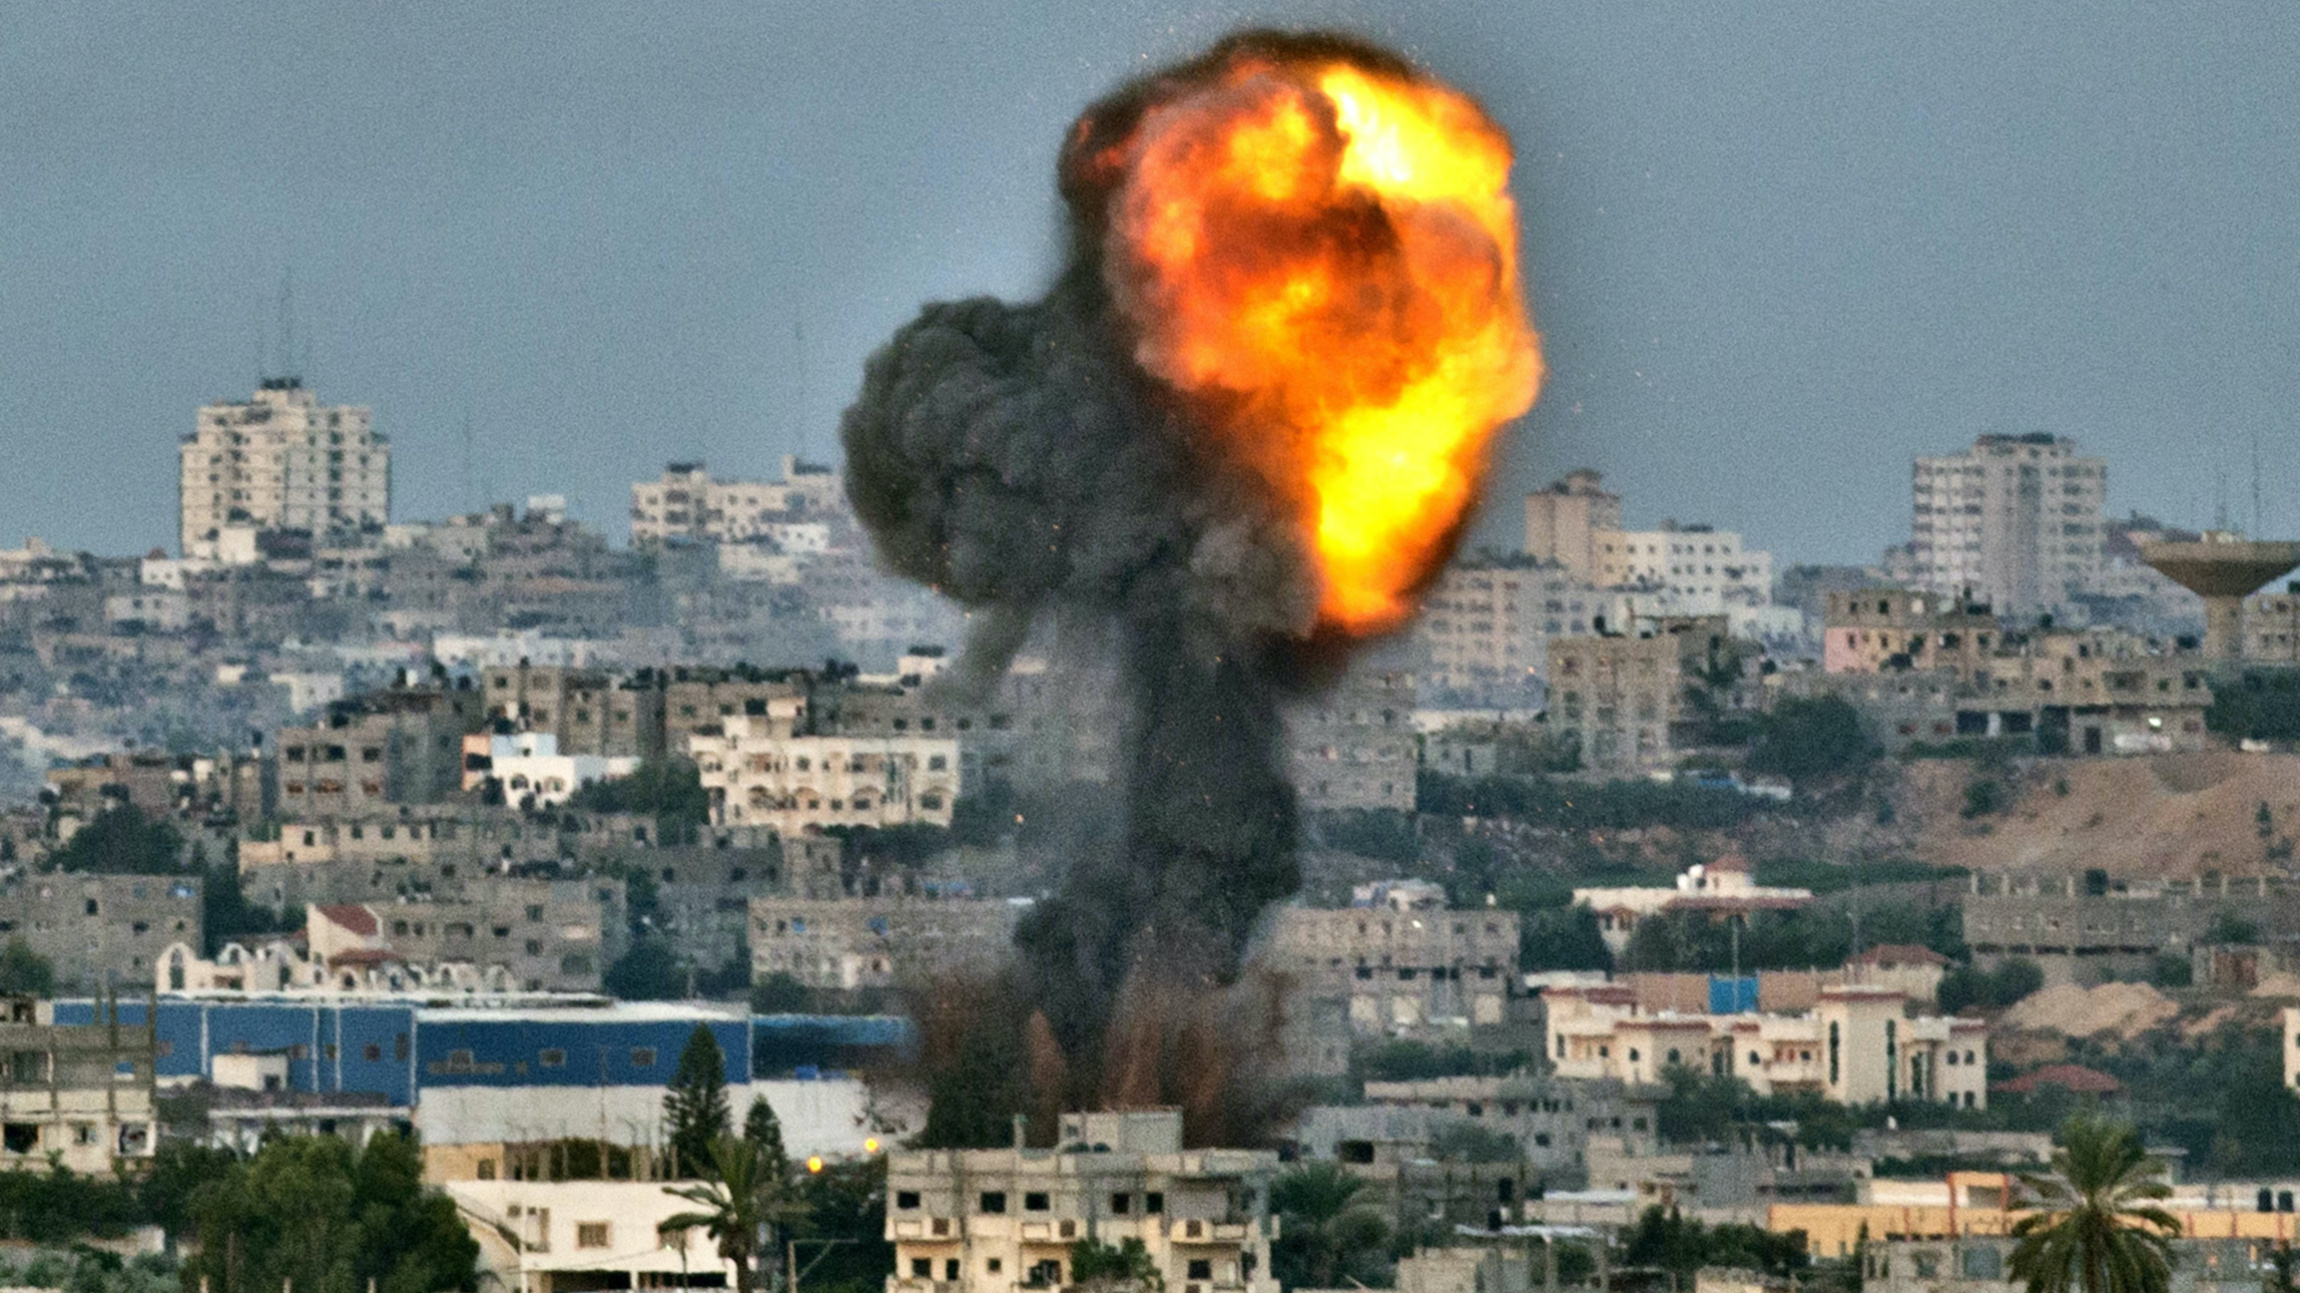 Smoke billowing from a spot targeted by an Israeli air strike inside the Gaza strip on 16 November 2012 (AFP)